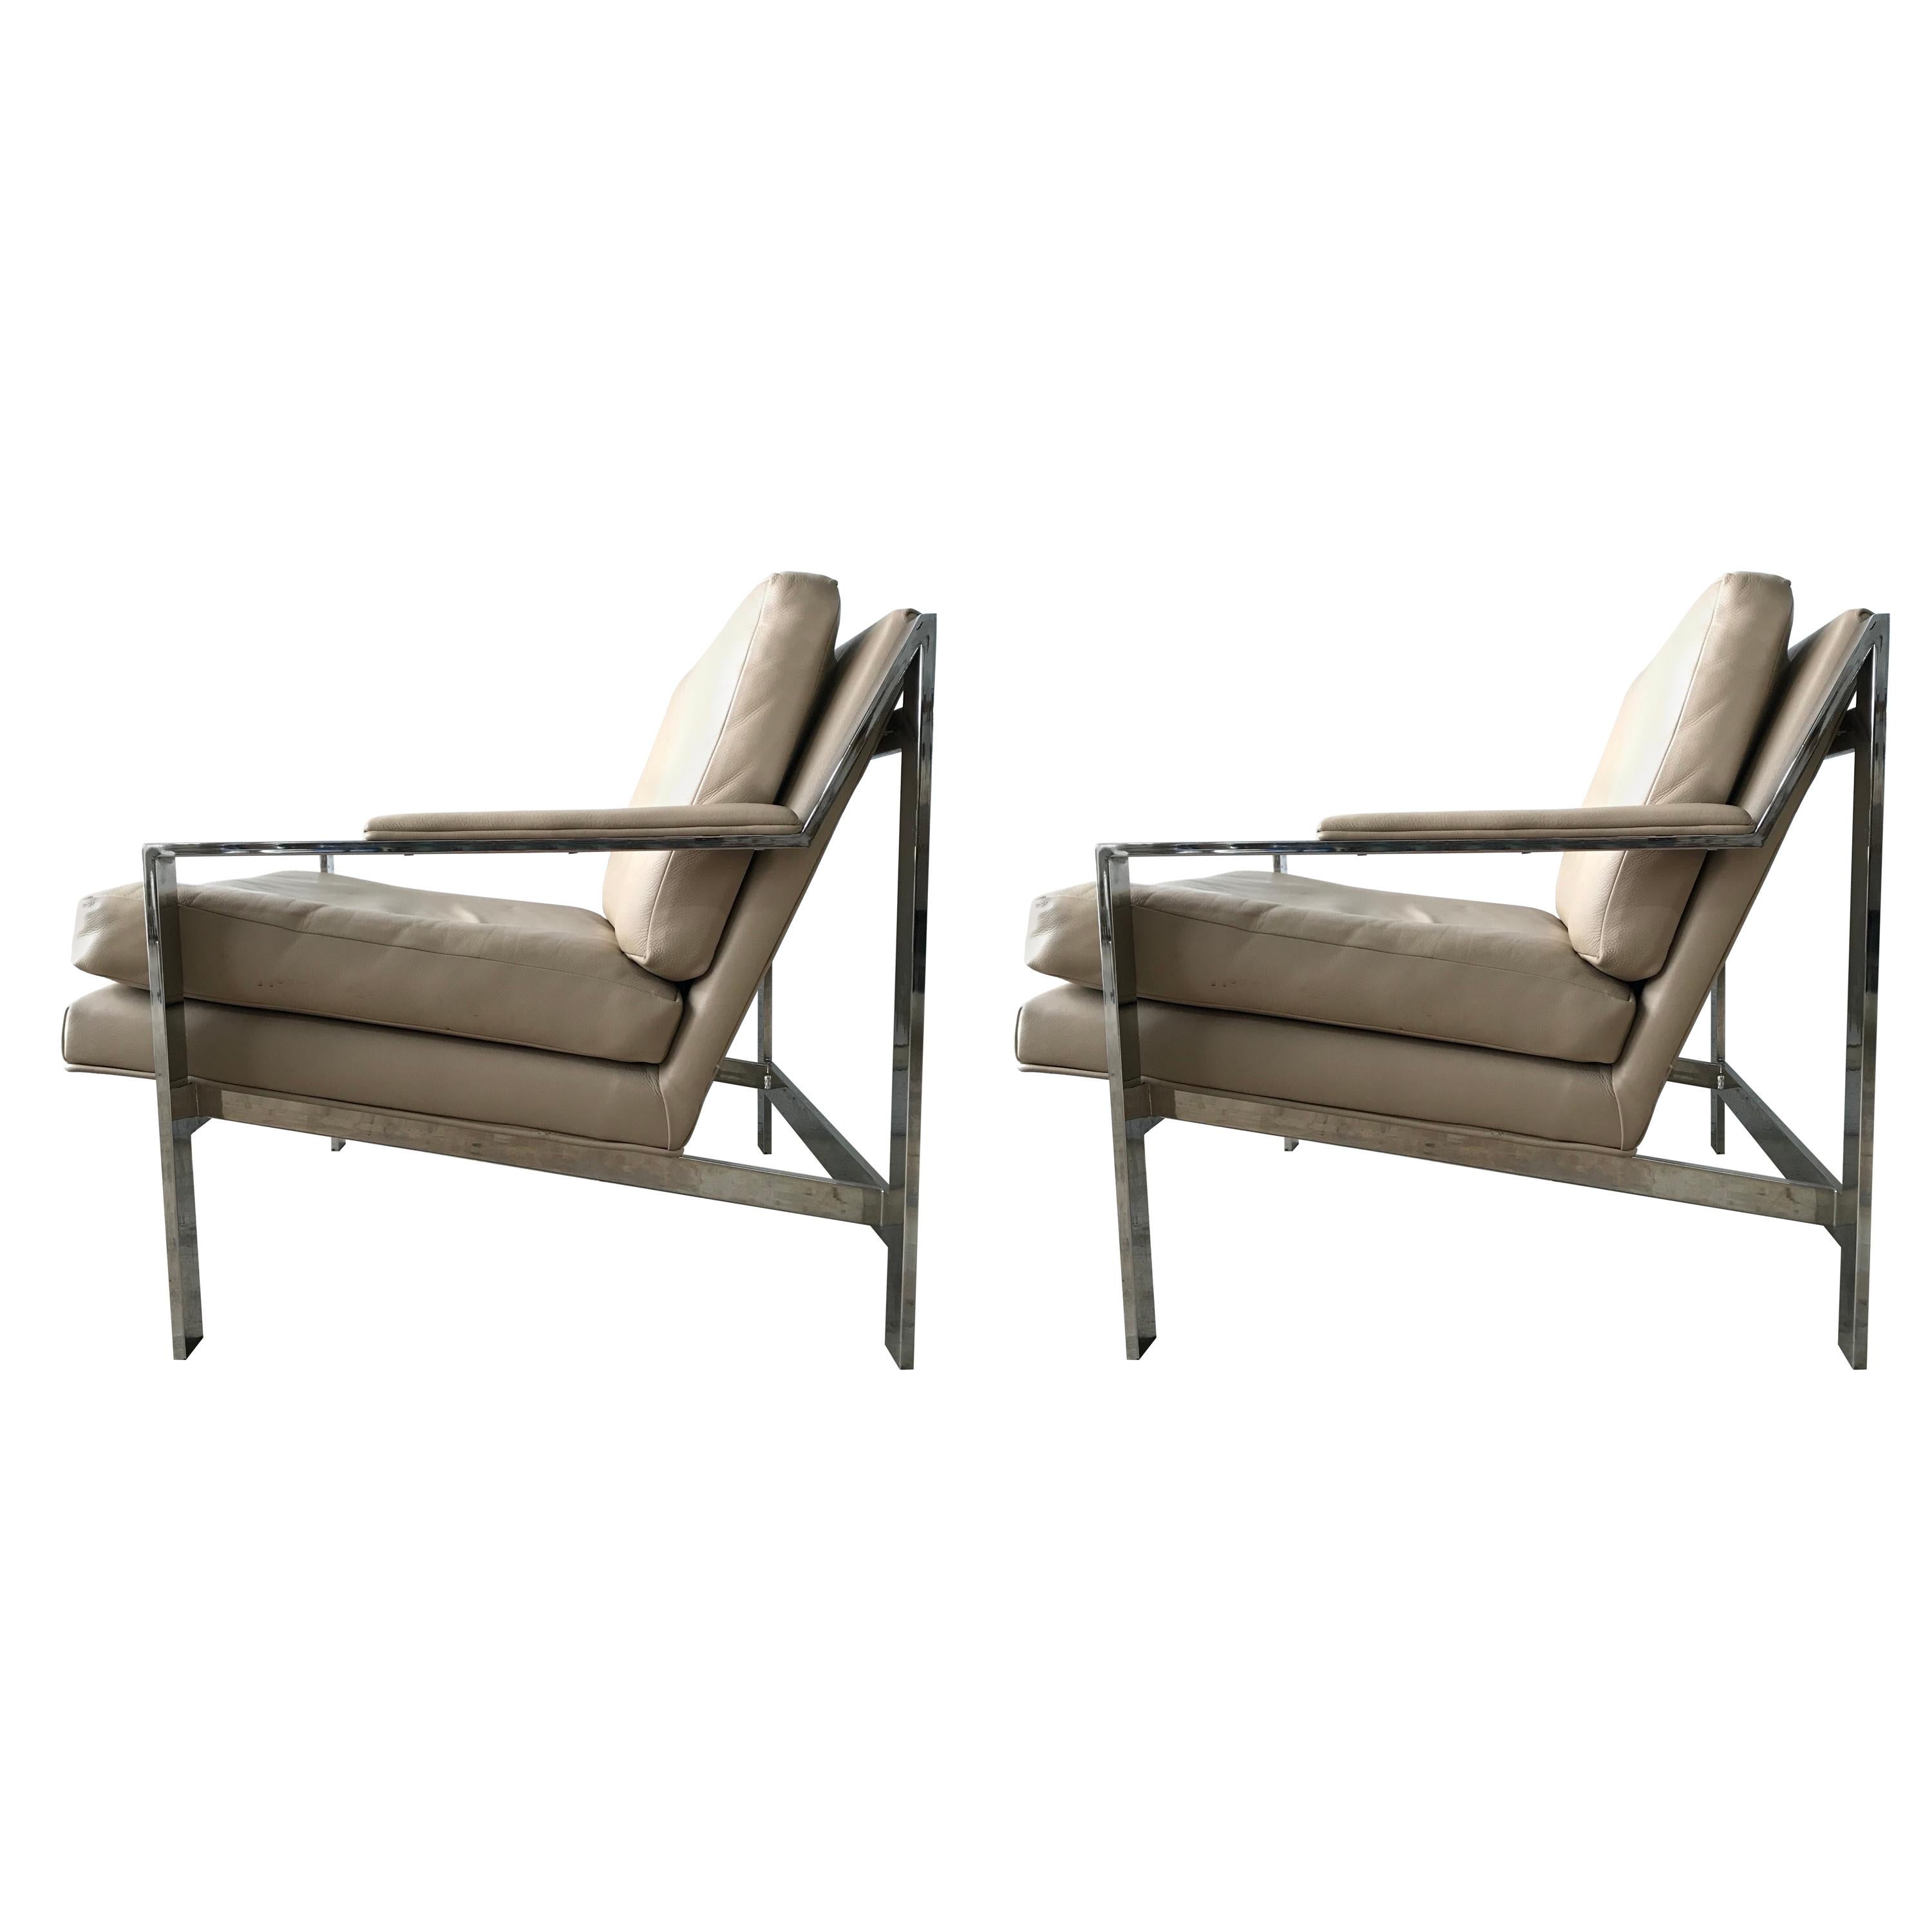 Pair of Cy Mann Leather and Chrome Armchairs in Milo Baughman Style